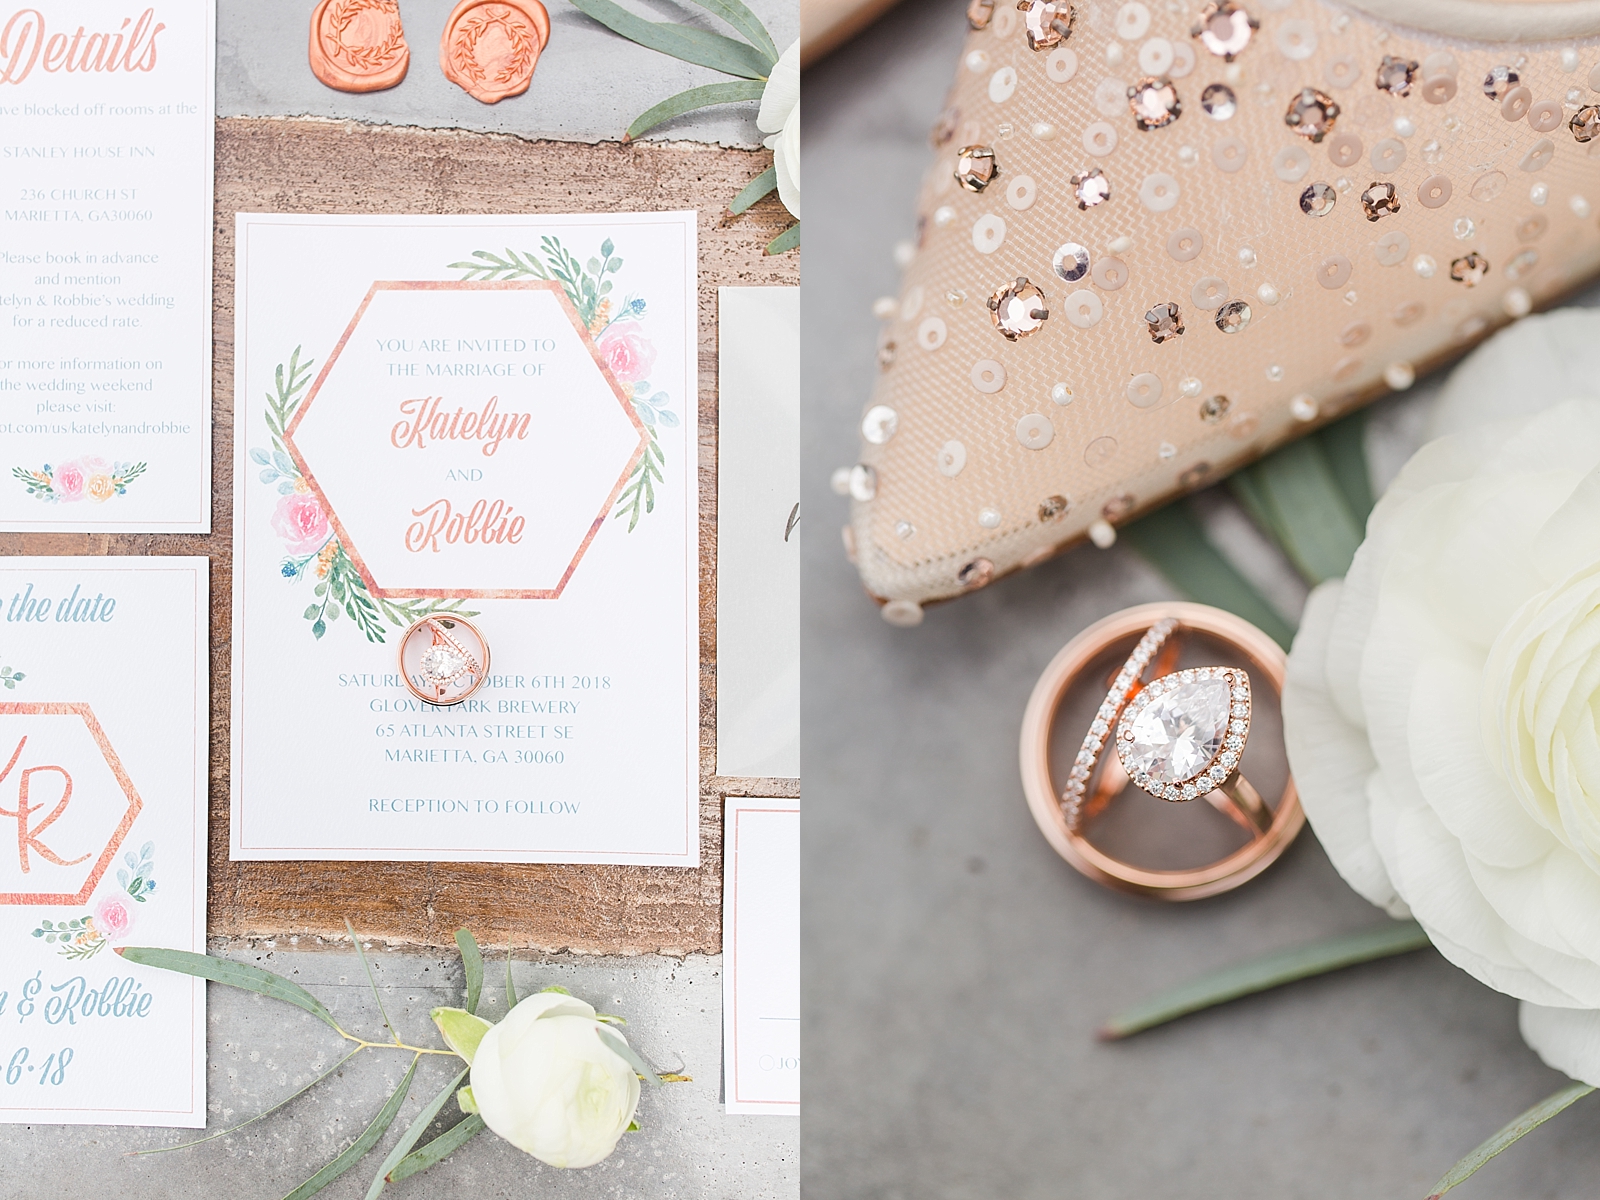 Glover Park Brewery Wedding invitation suite with wedding rings and detail of rings with bridal shoe Photo